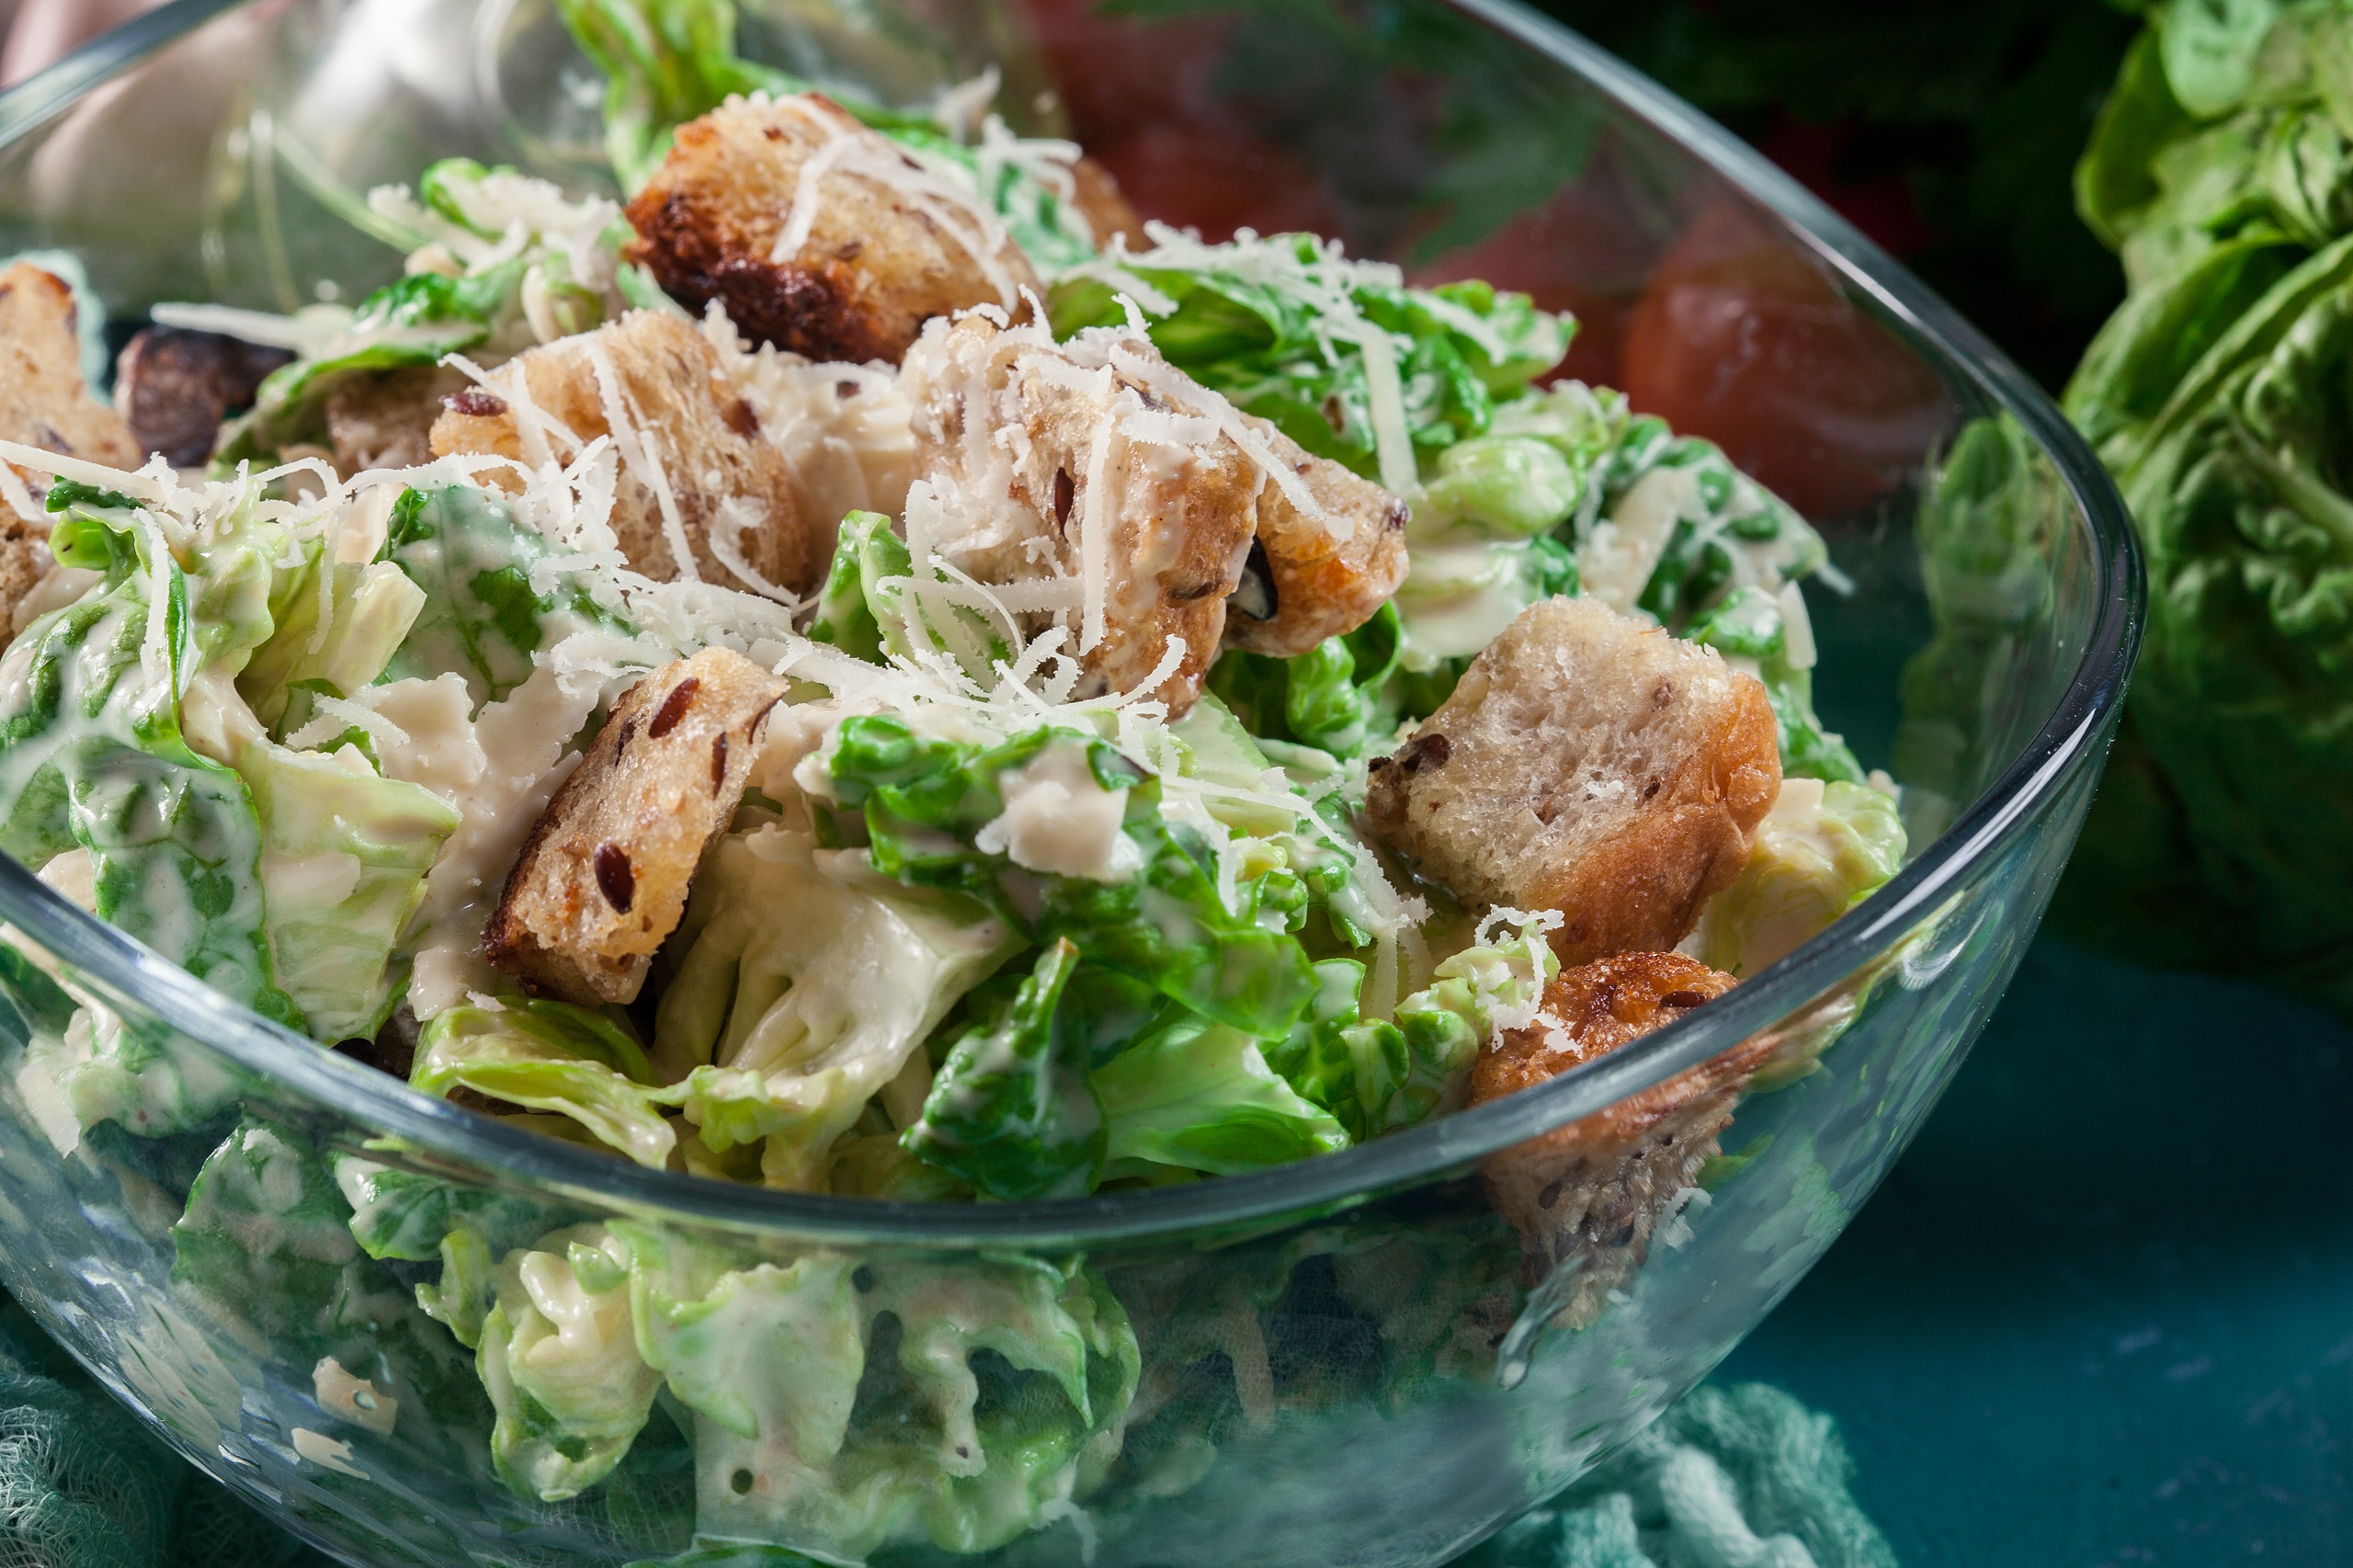 Caesar salad with parmesan cheese shavings and crunchy croutons with homemade caesar dressing in a clear salad bowl.